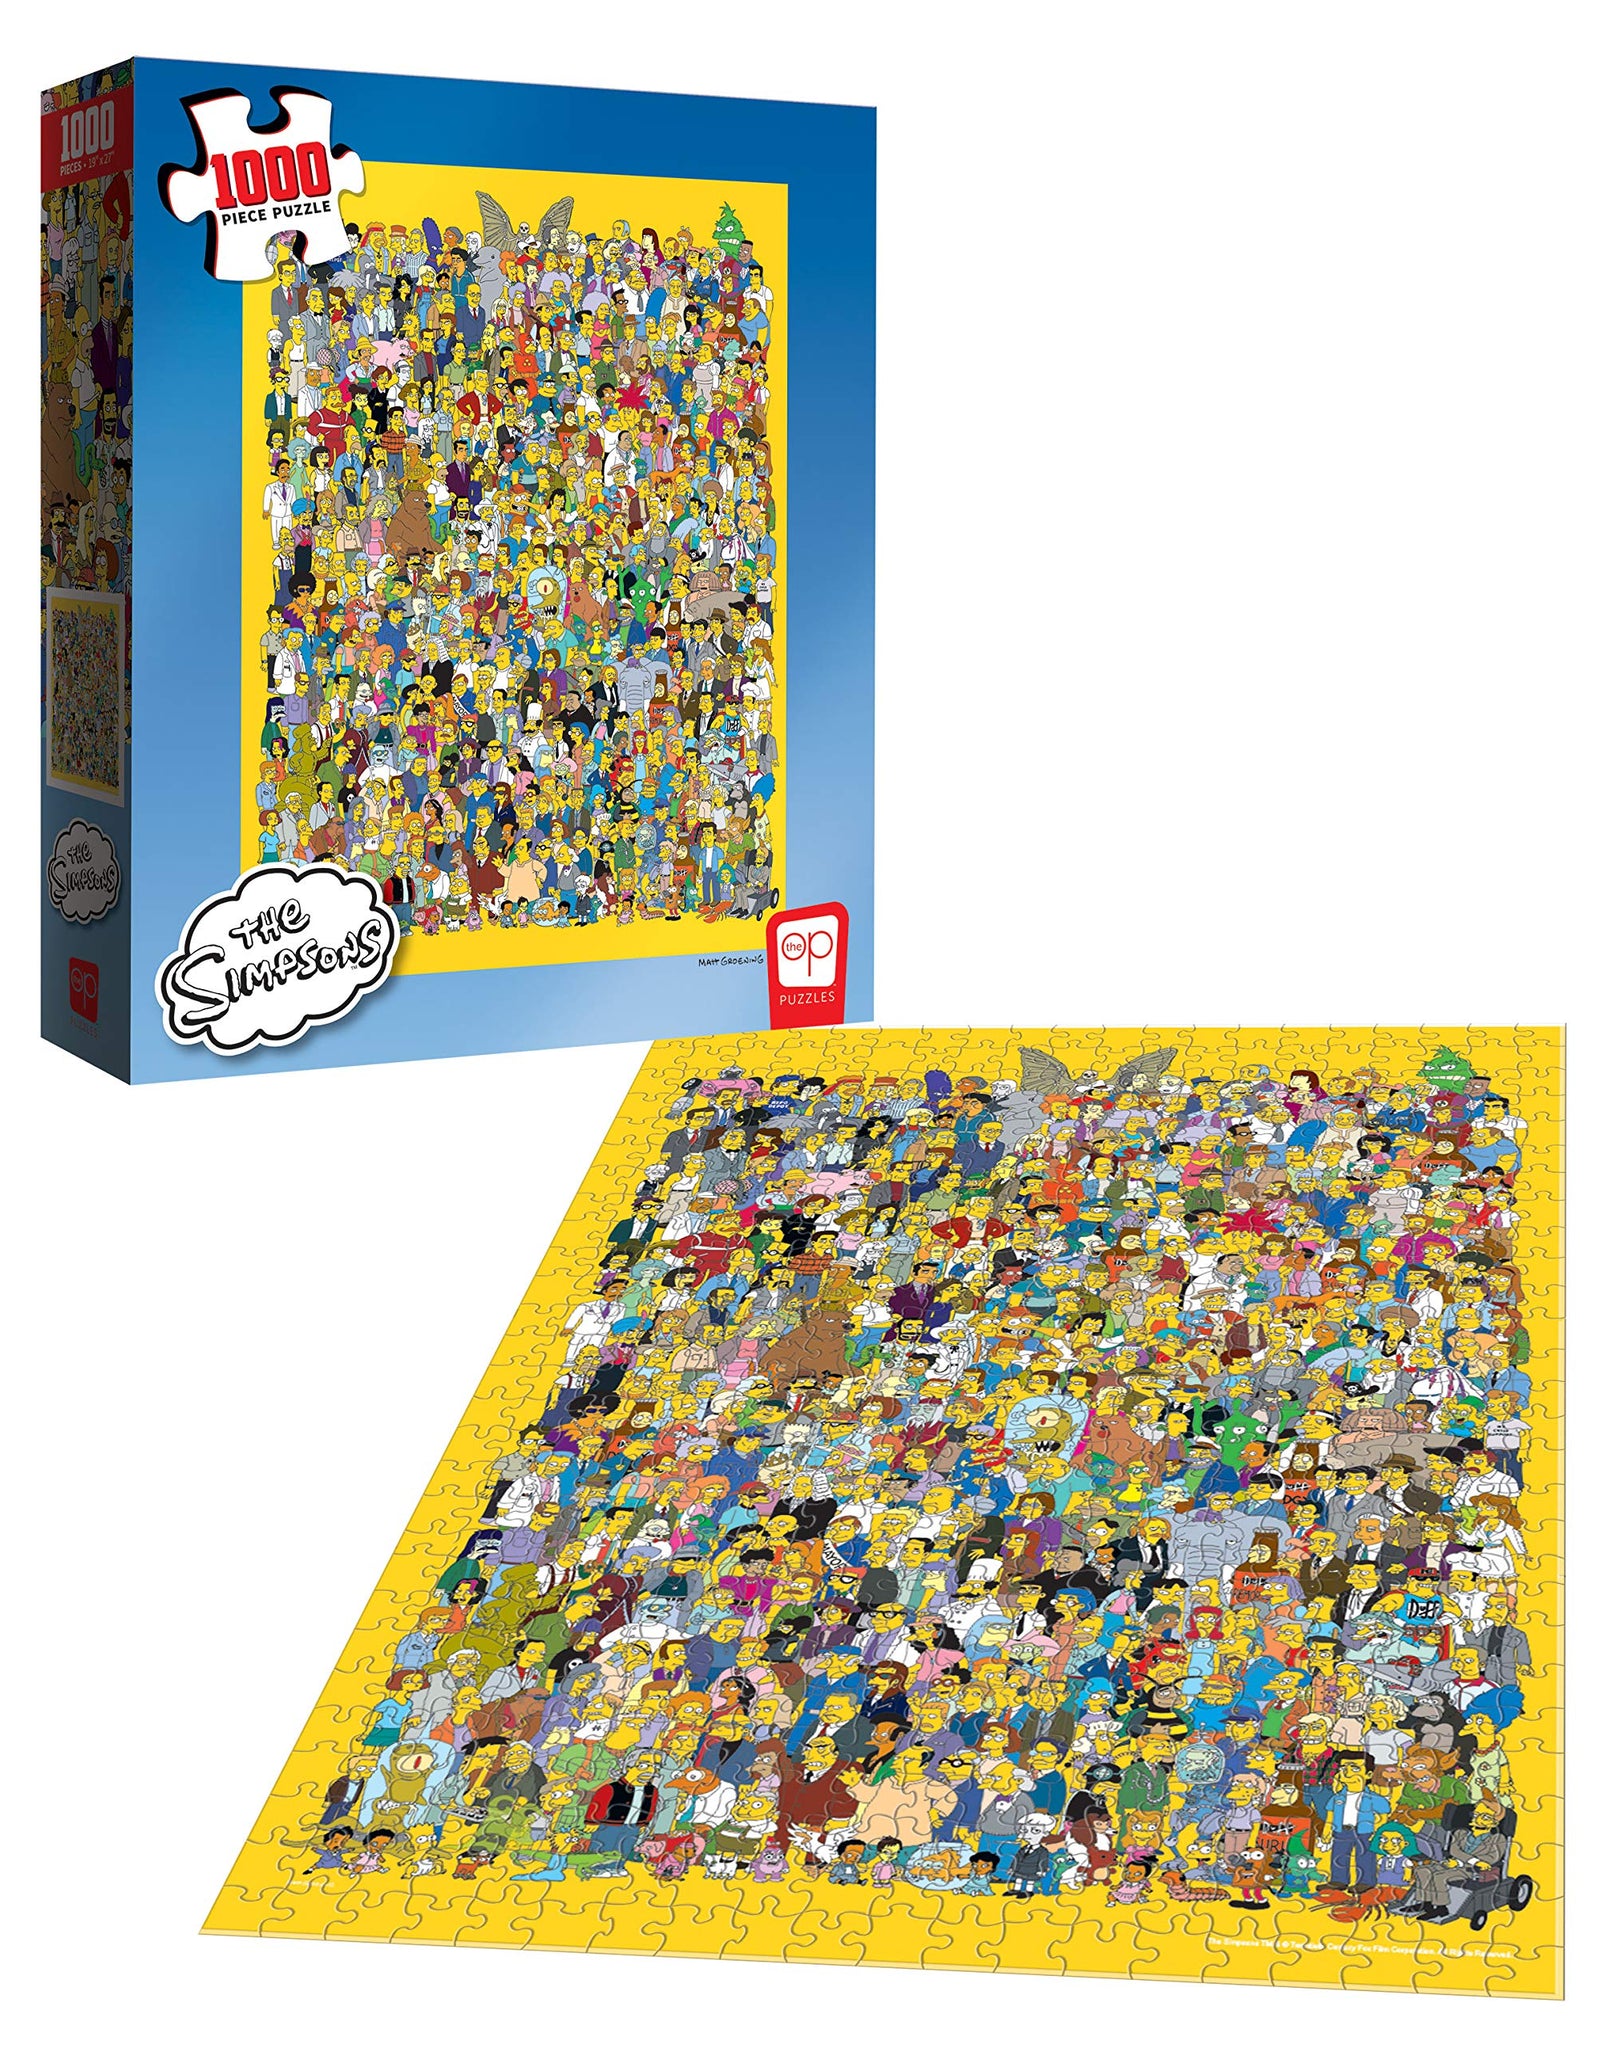 USAOPOLY The Simpsons Cast of Thousands 1000 Piece Jigsaw Puzzle | Officially Licensed Simpsons Merchandise | Collectible Puzzle Featuring Favorite Simpsons Characters from 20th Century Fox, Yellow